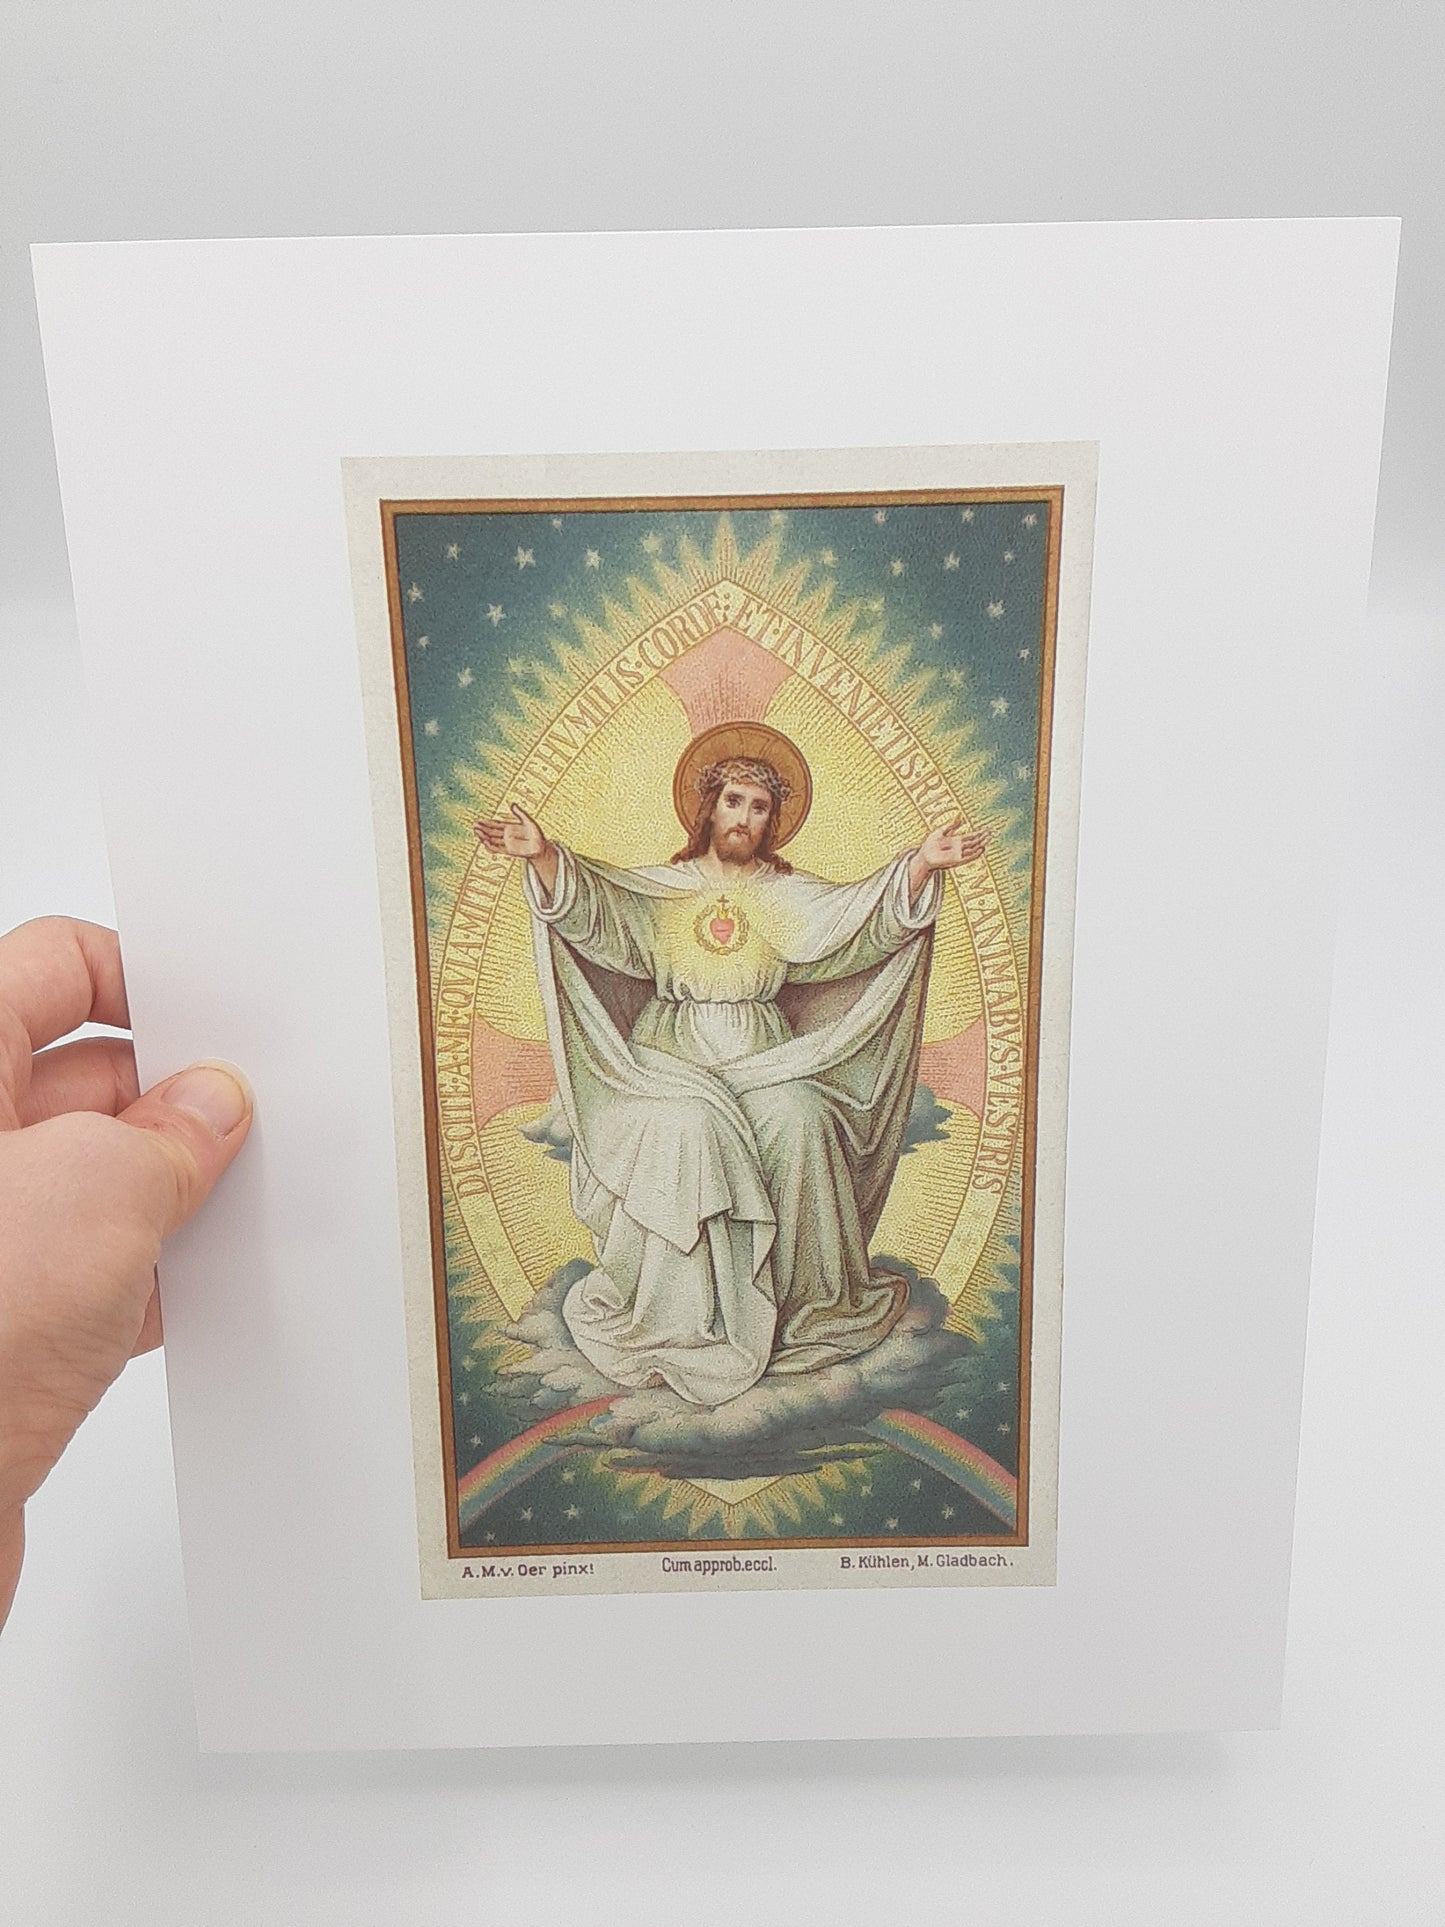 Come Unto Me – Jesus – based on a Vintage Holy Card – Christian Gift/Easter Gift – Christian Art Print – Archival Quality